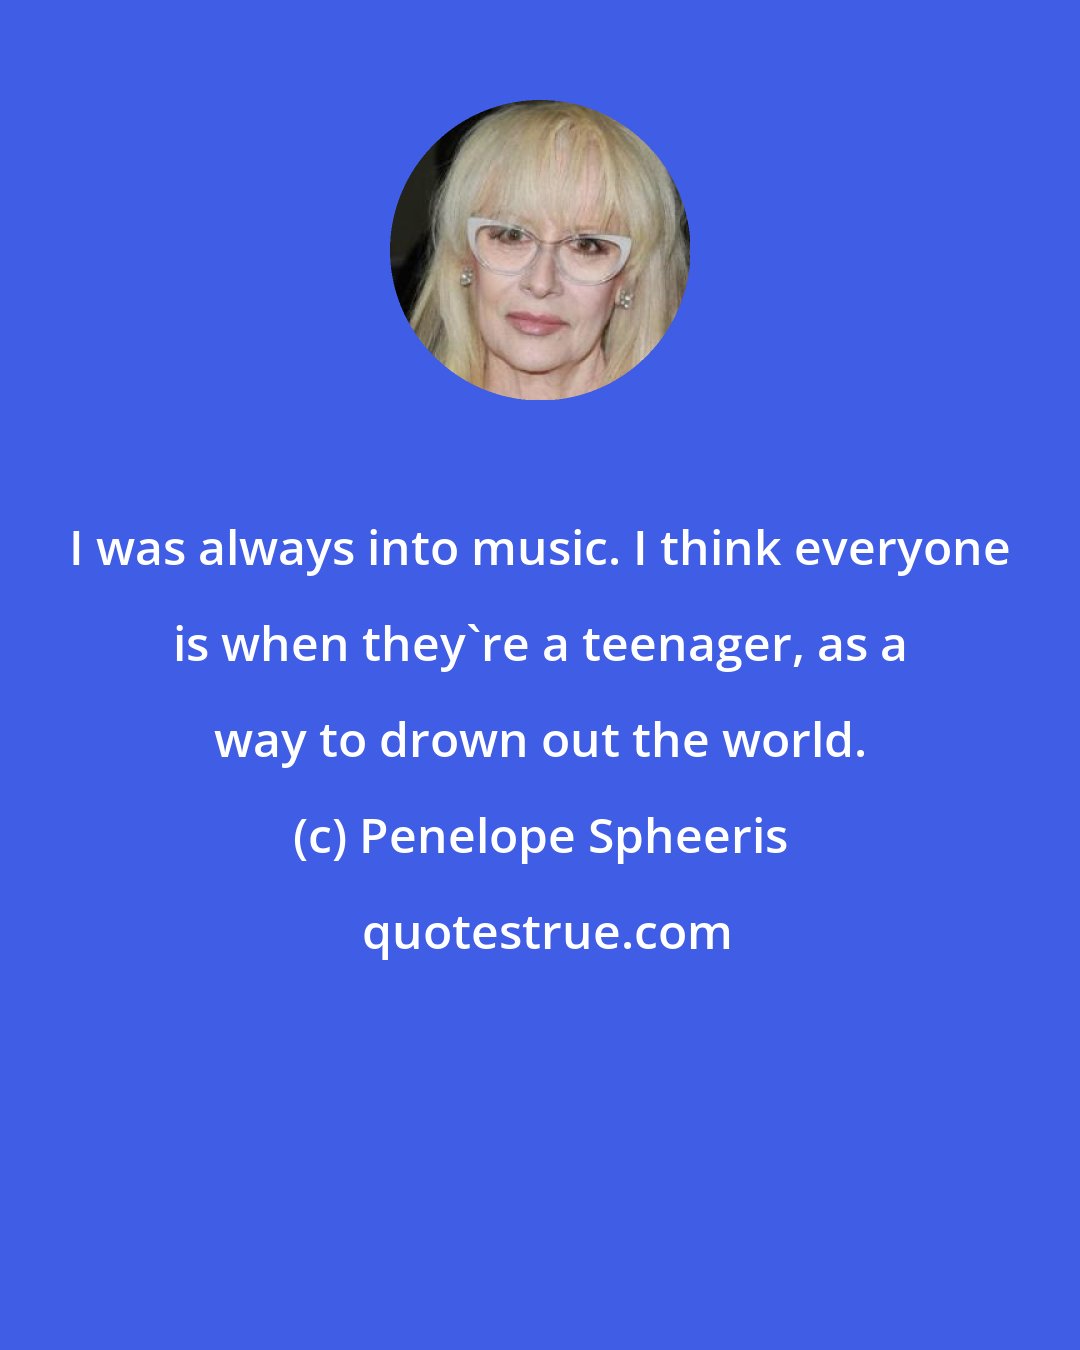 Penelope Spheeris: I was always into music. I think everyone is when they're a teenager, as a way to drown out the world.